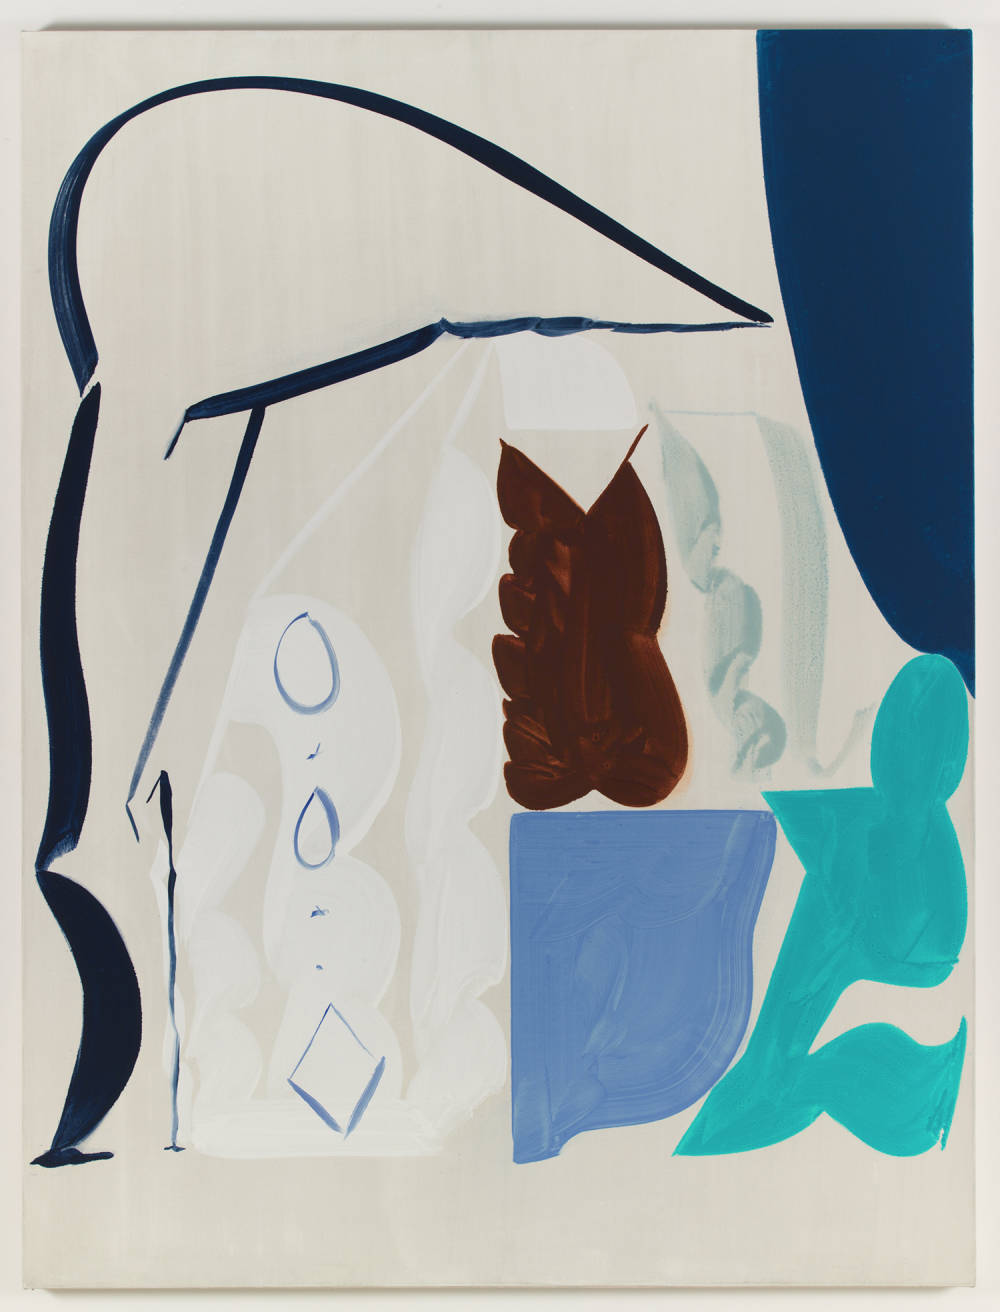 A large abstract painting. The ground of the painting is a tinted gray. In the top right corner is a section painted blue. There is a calligraphic mark moving up the left side. The bottom right contains an abstracted form painted in an aqua blue. 